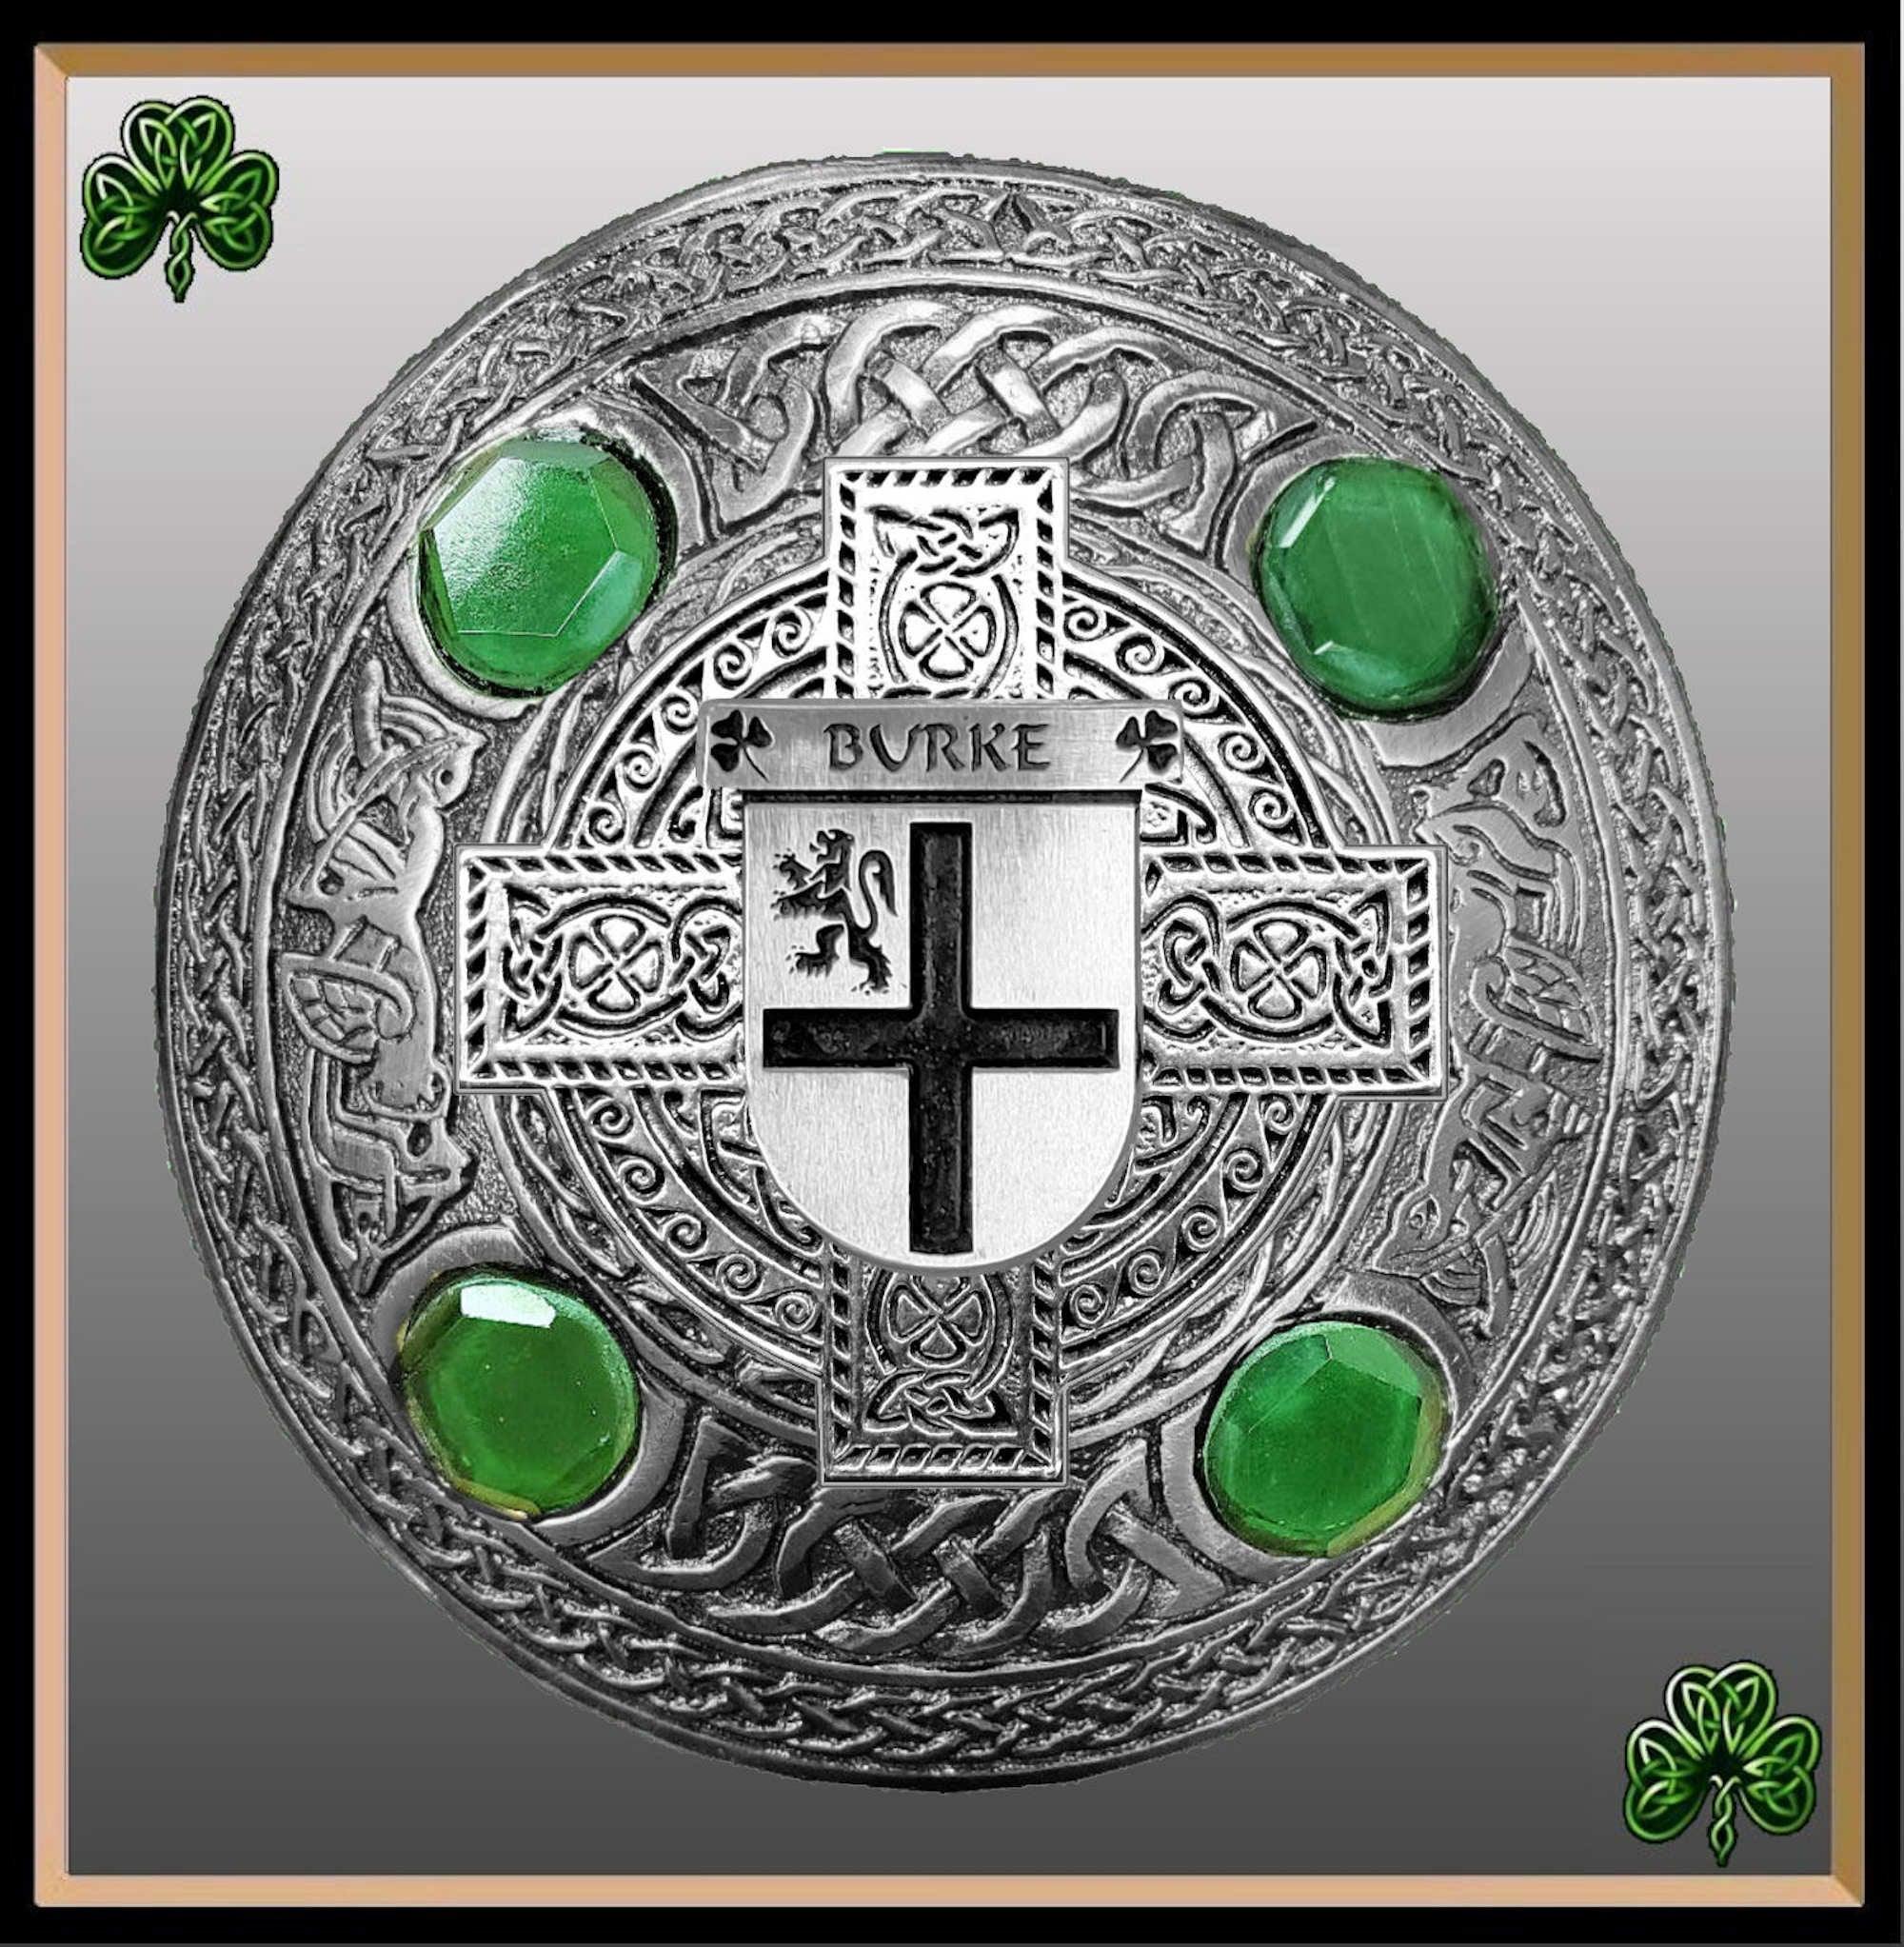 Burke Irish Coat of Arms Celtic Design Plaid Brooch with Green Stones